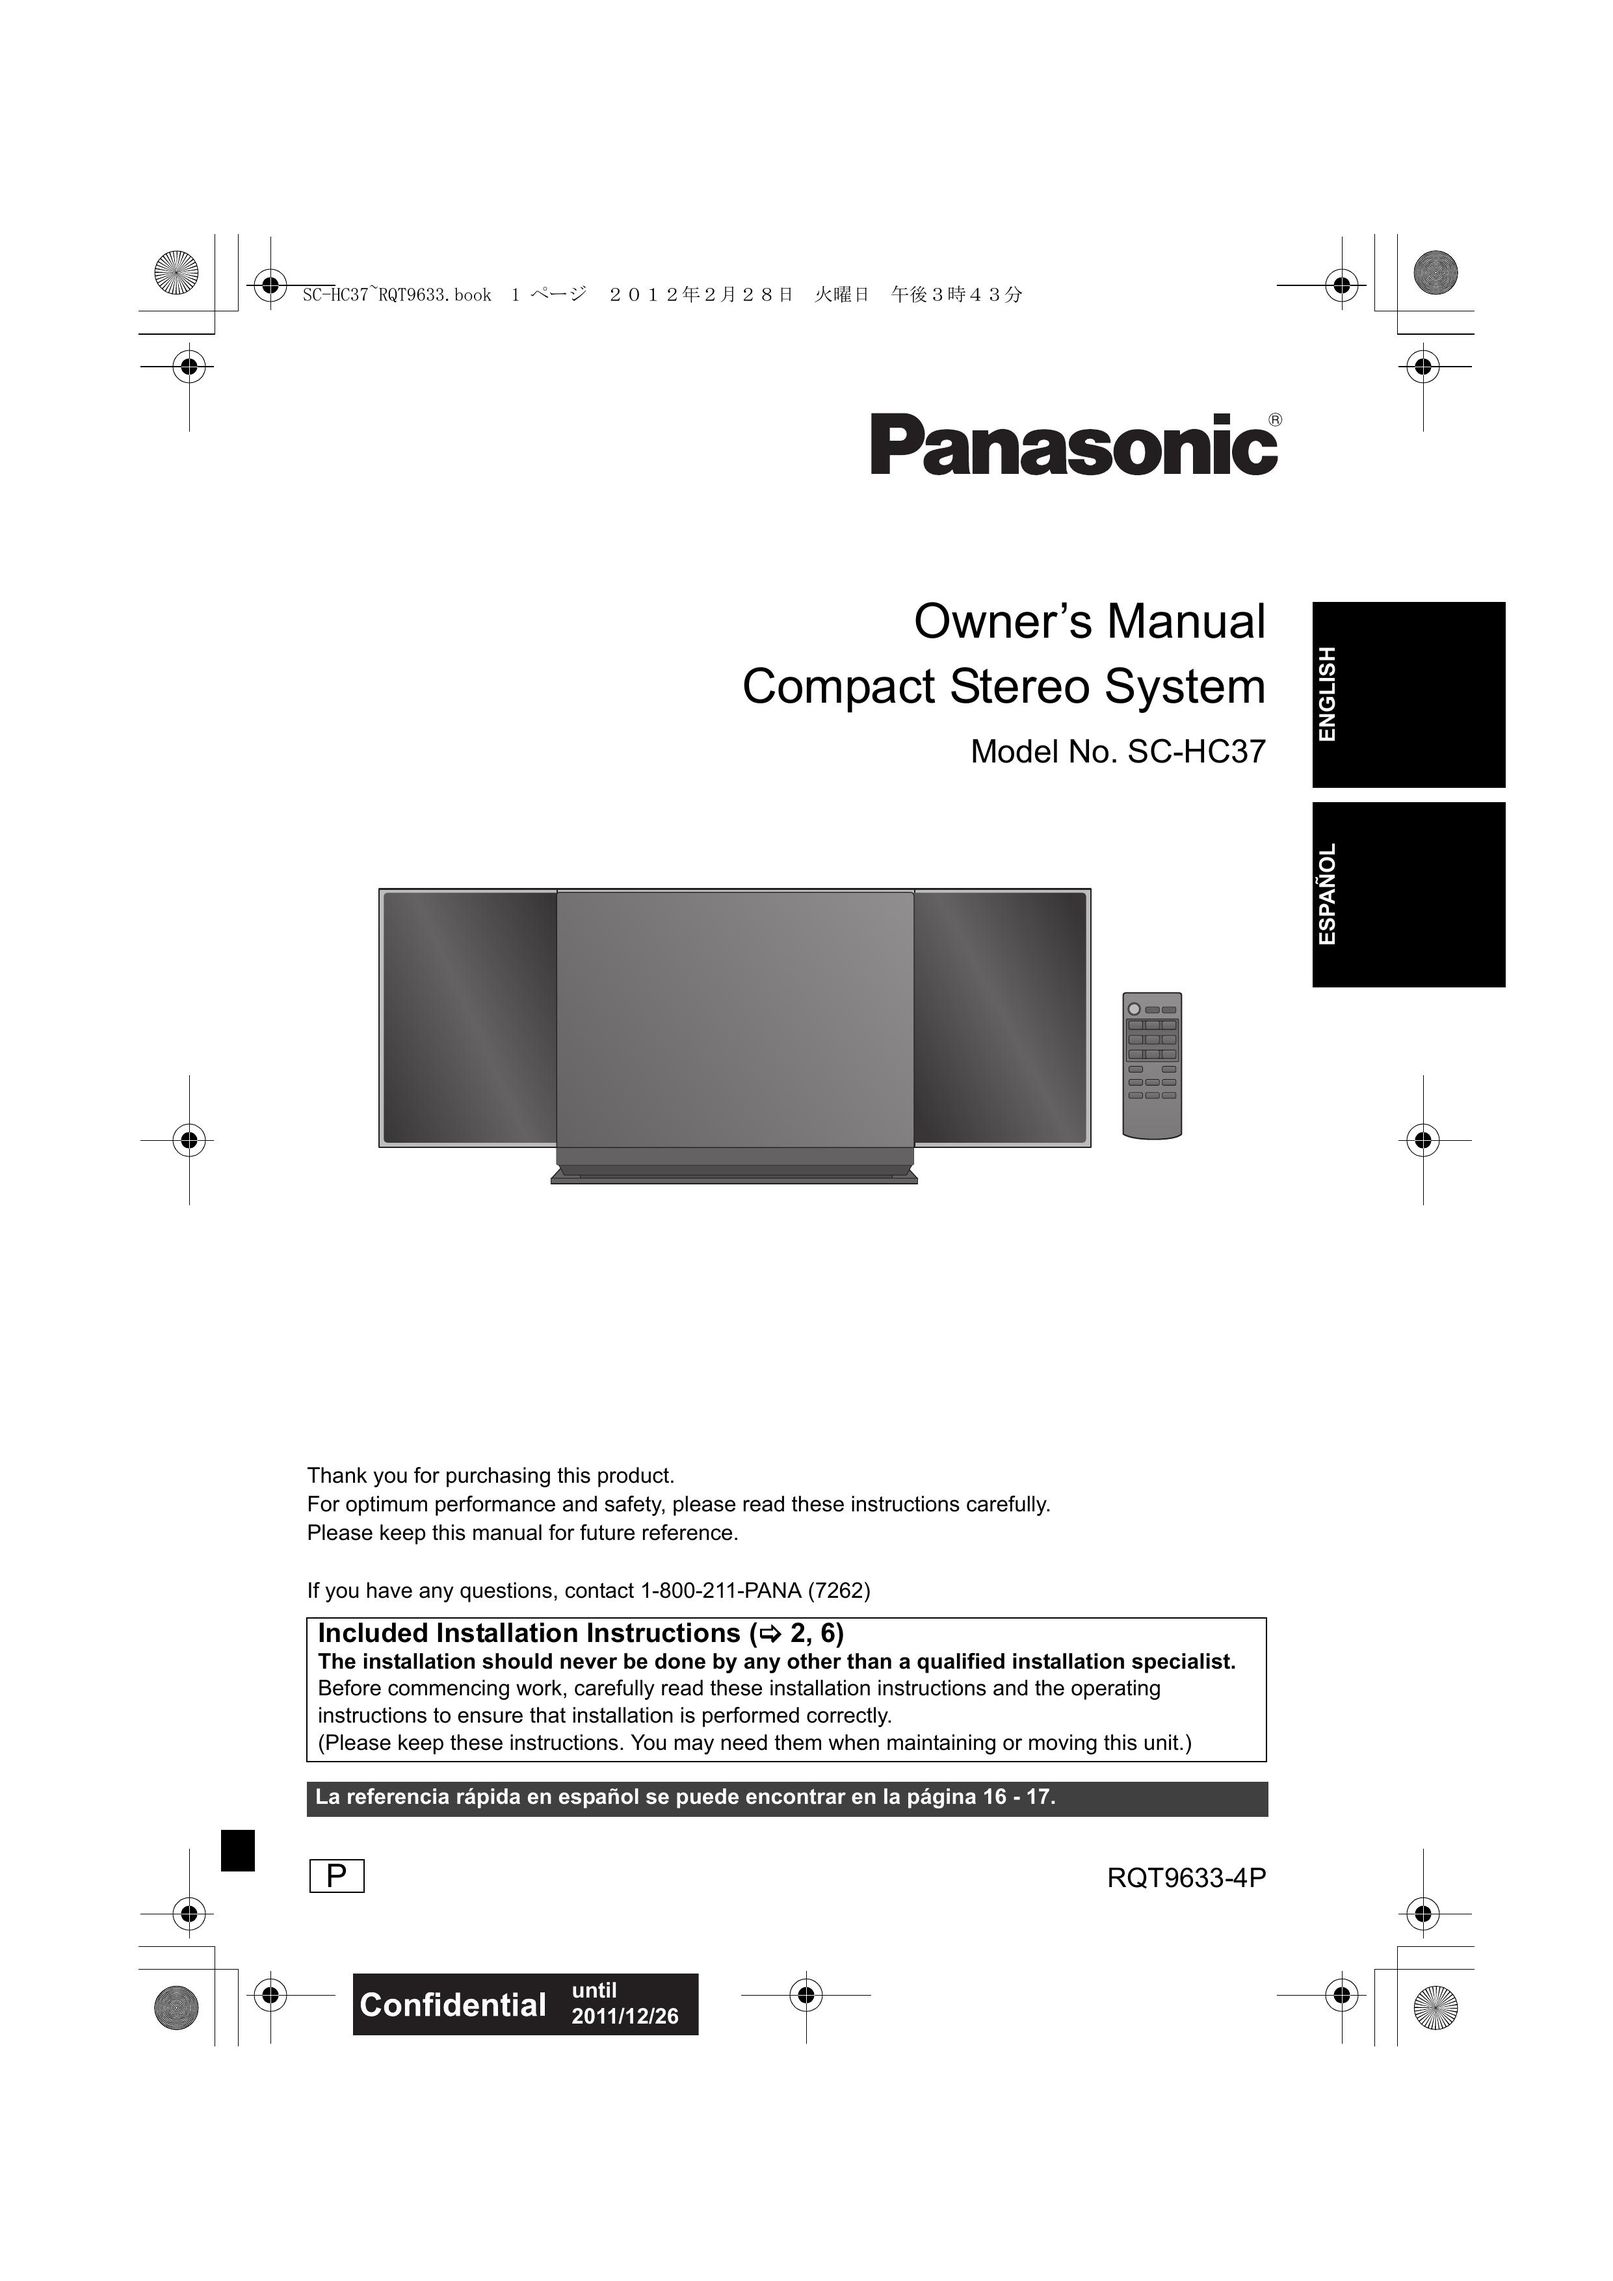 Panasonic RQT9633-4P Stereo System User Manual